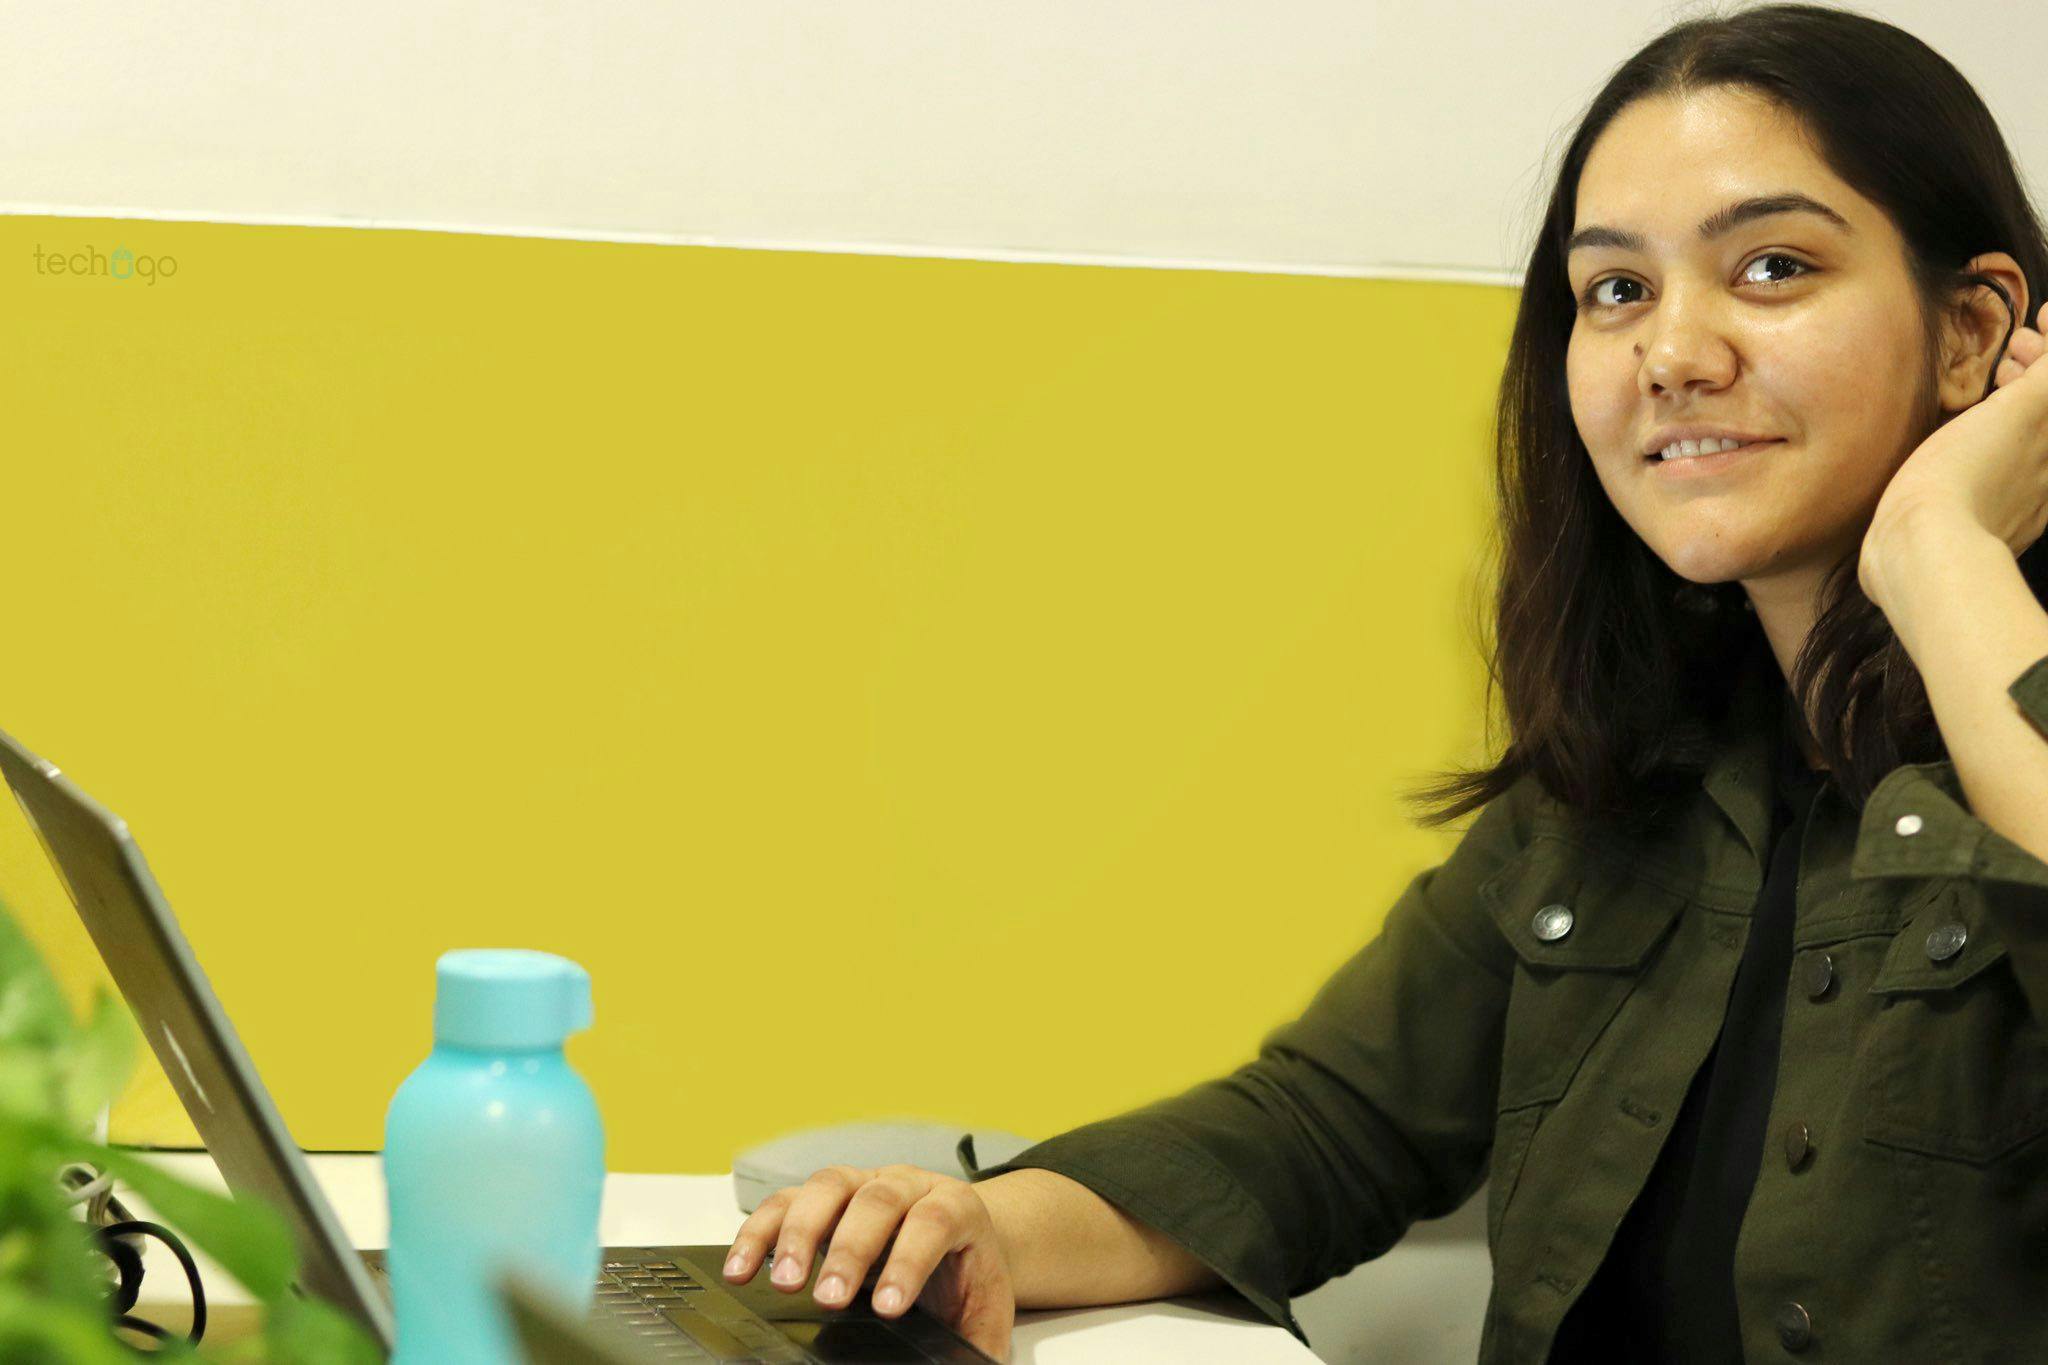 /meet-the-writer-aastha-sharma-on-tech-stand-up-comedy-and-cats feature image